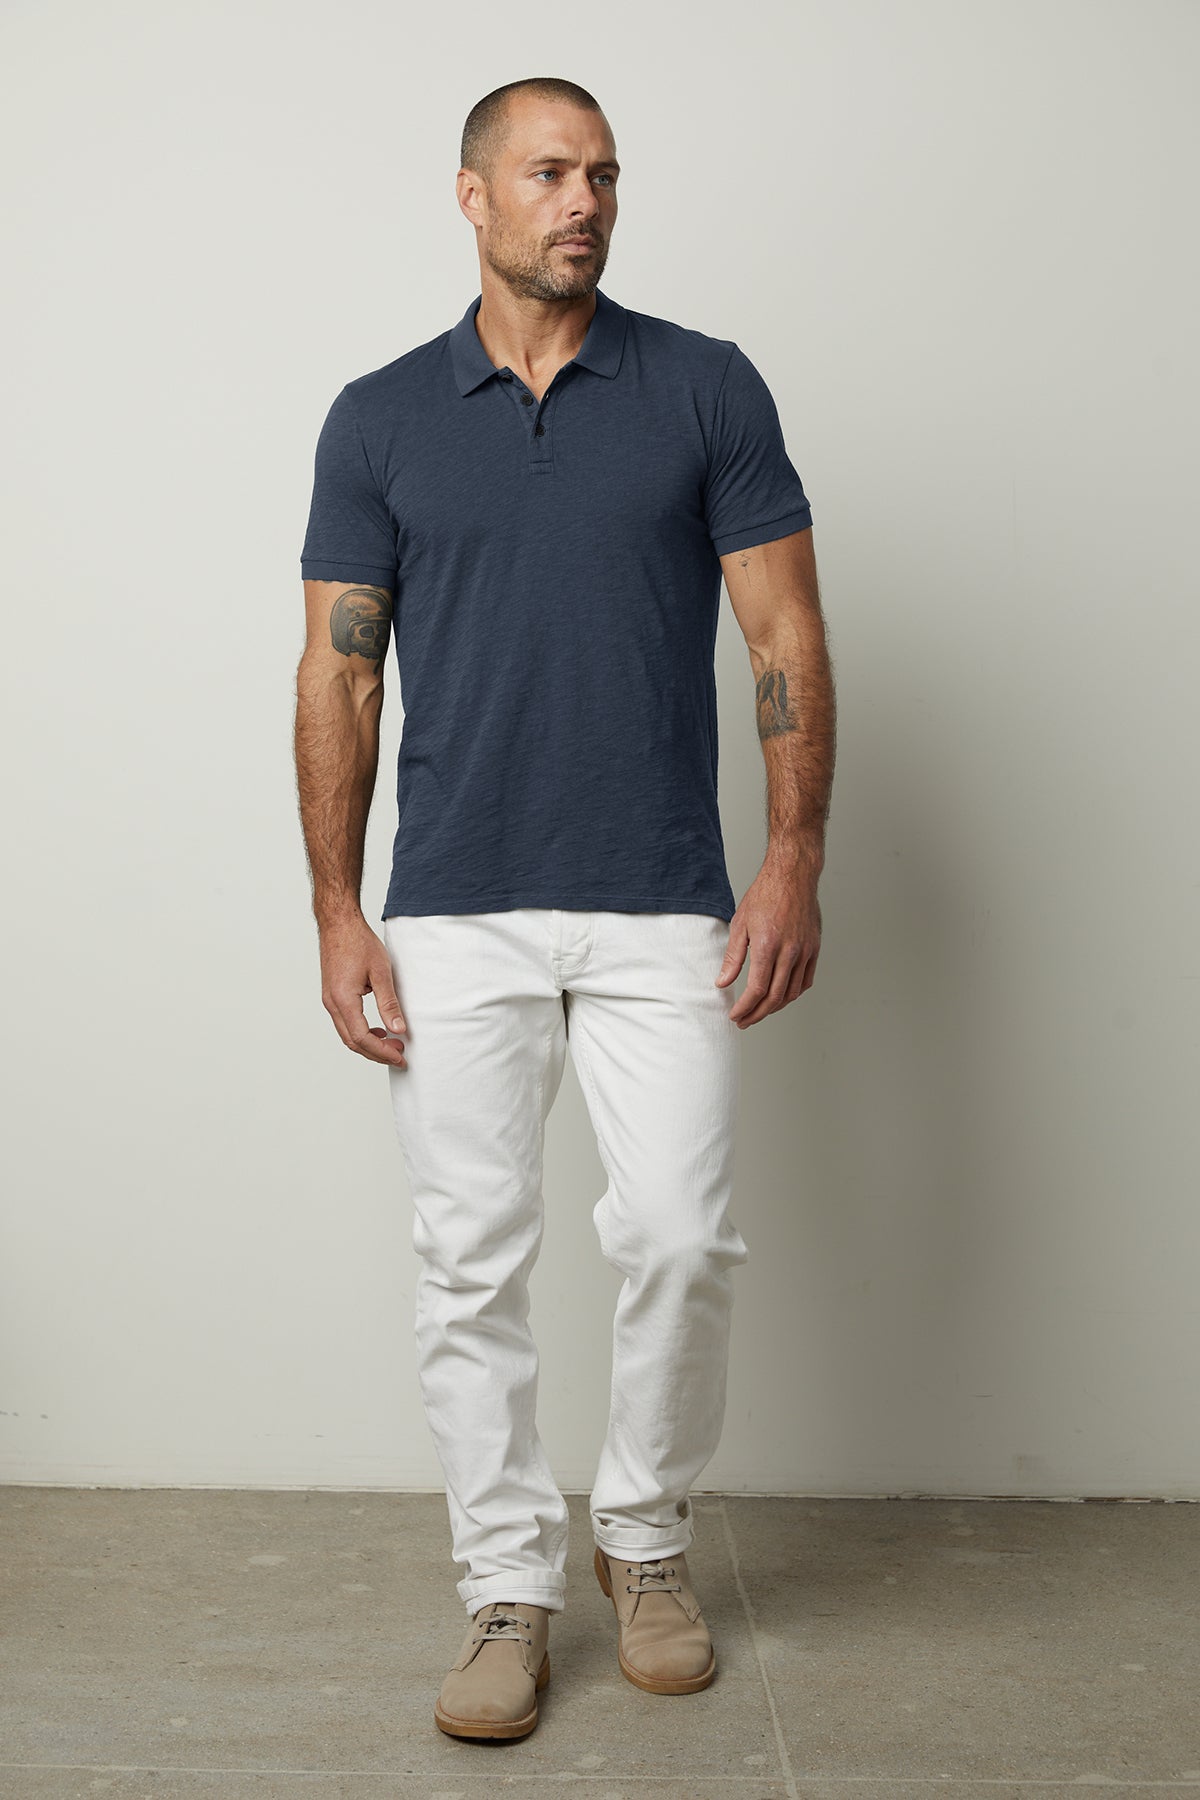 A man wearing a NIKO POLO shirt by Velvet by Graham & Spencer and white pants.-26705928552641